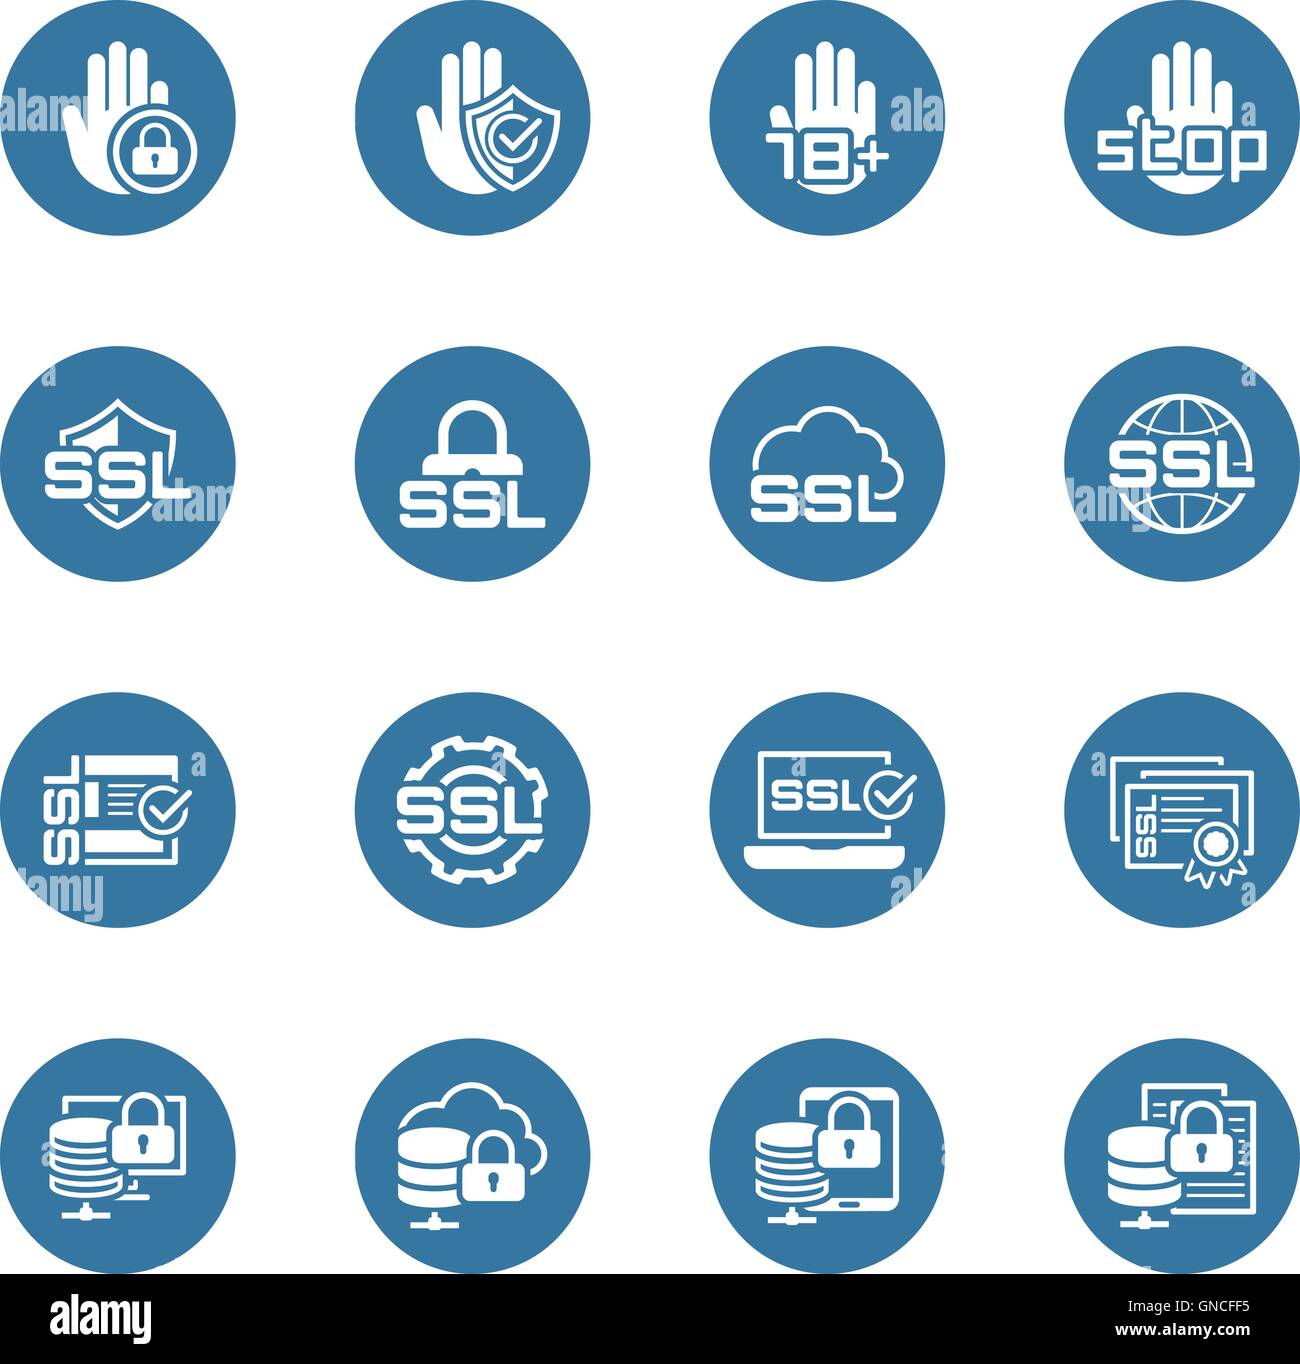 Flat Design Security and Protection Icons Set. Stock Vector